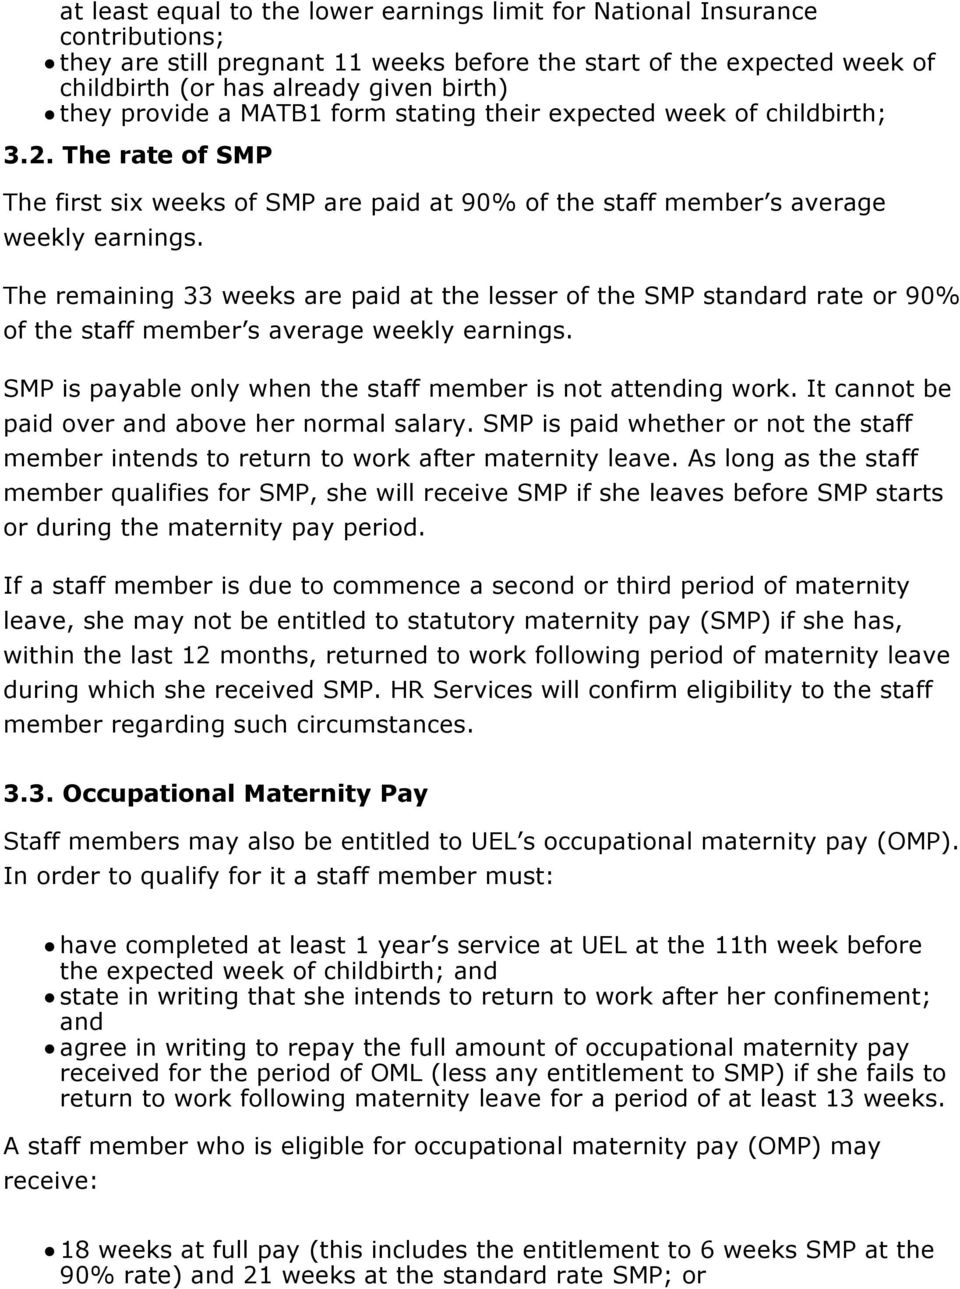 The remaining 33 weeks are paid at the lesser of the SMP standard rate or 90% of the staff member s average weekly earnings. SMP is payable only when the staff member is not attending work.